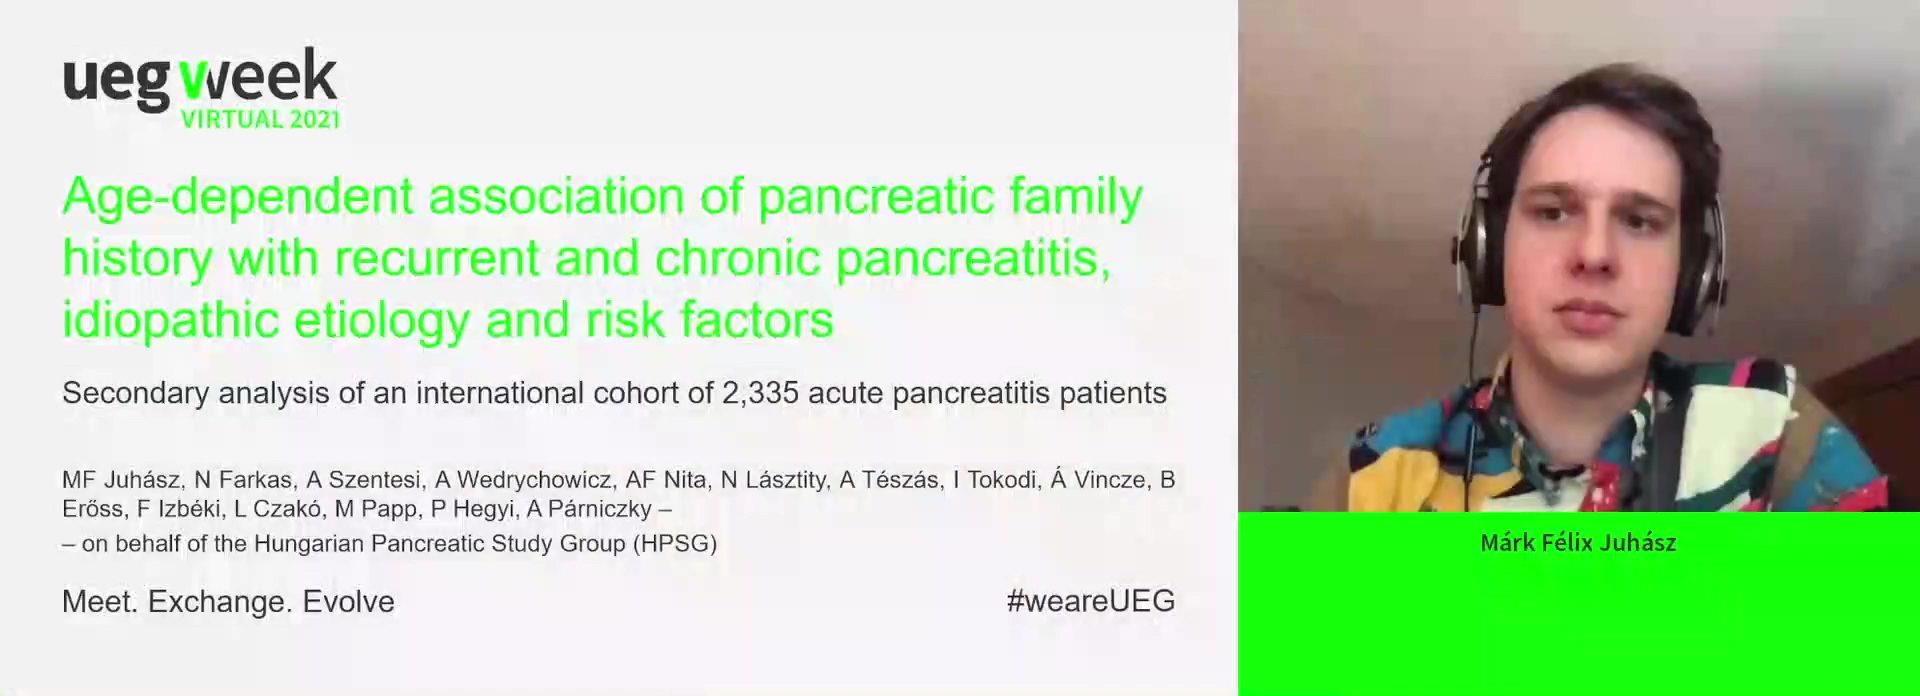 AGE-DEPENDENT ASSOCIATION OF PANCREATIC FAMILY HISTORY WITH RECURRENT AND CHRONIC PANCREATITIS, IDIOPATHIC ETIOLOGY AND RISK FACTORS: SECONDARY ANALYSIS OF AN INTERNATIONAL COHORT OF 2,335 ACUTE PANCREATITIS PATIENTS